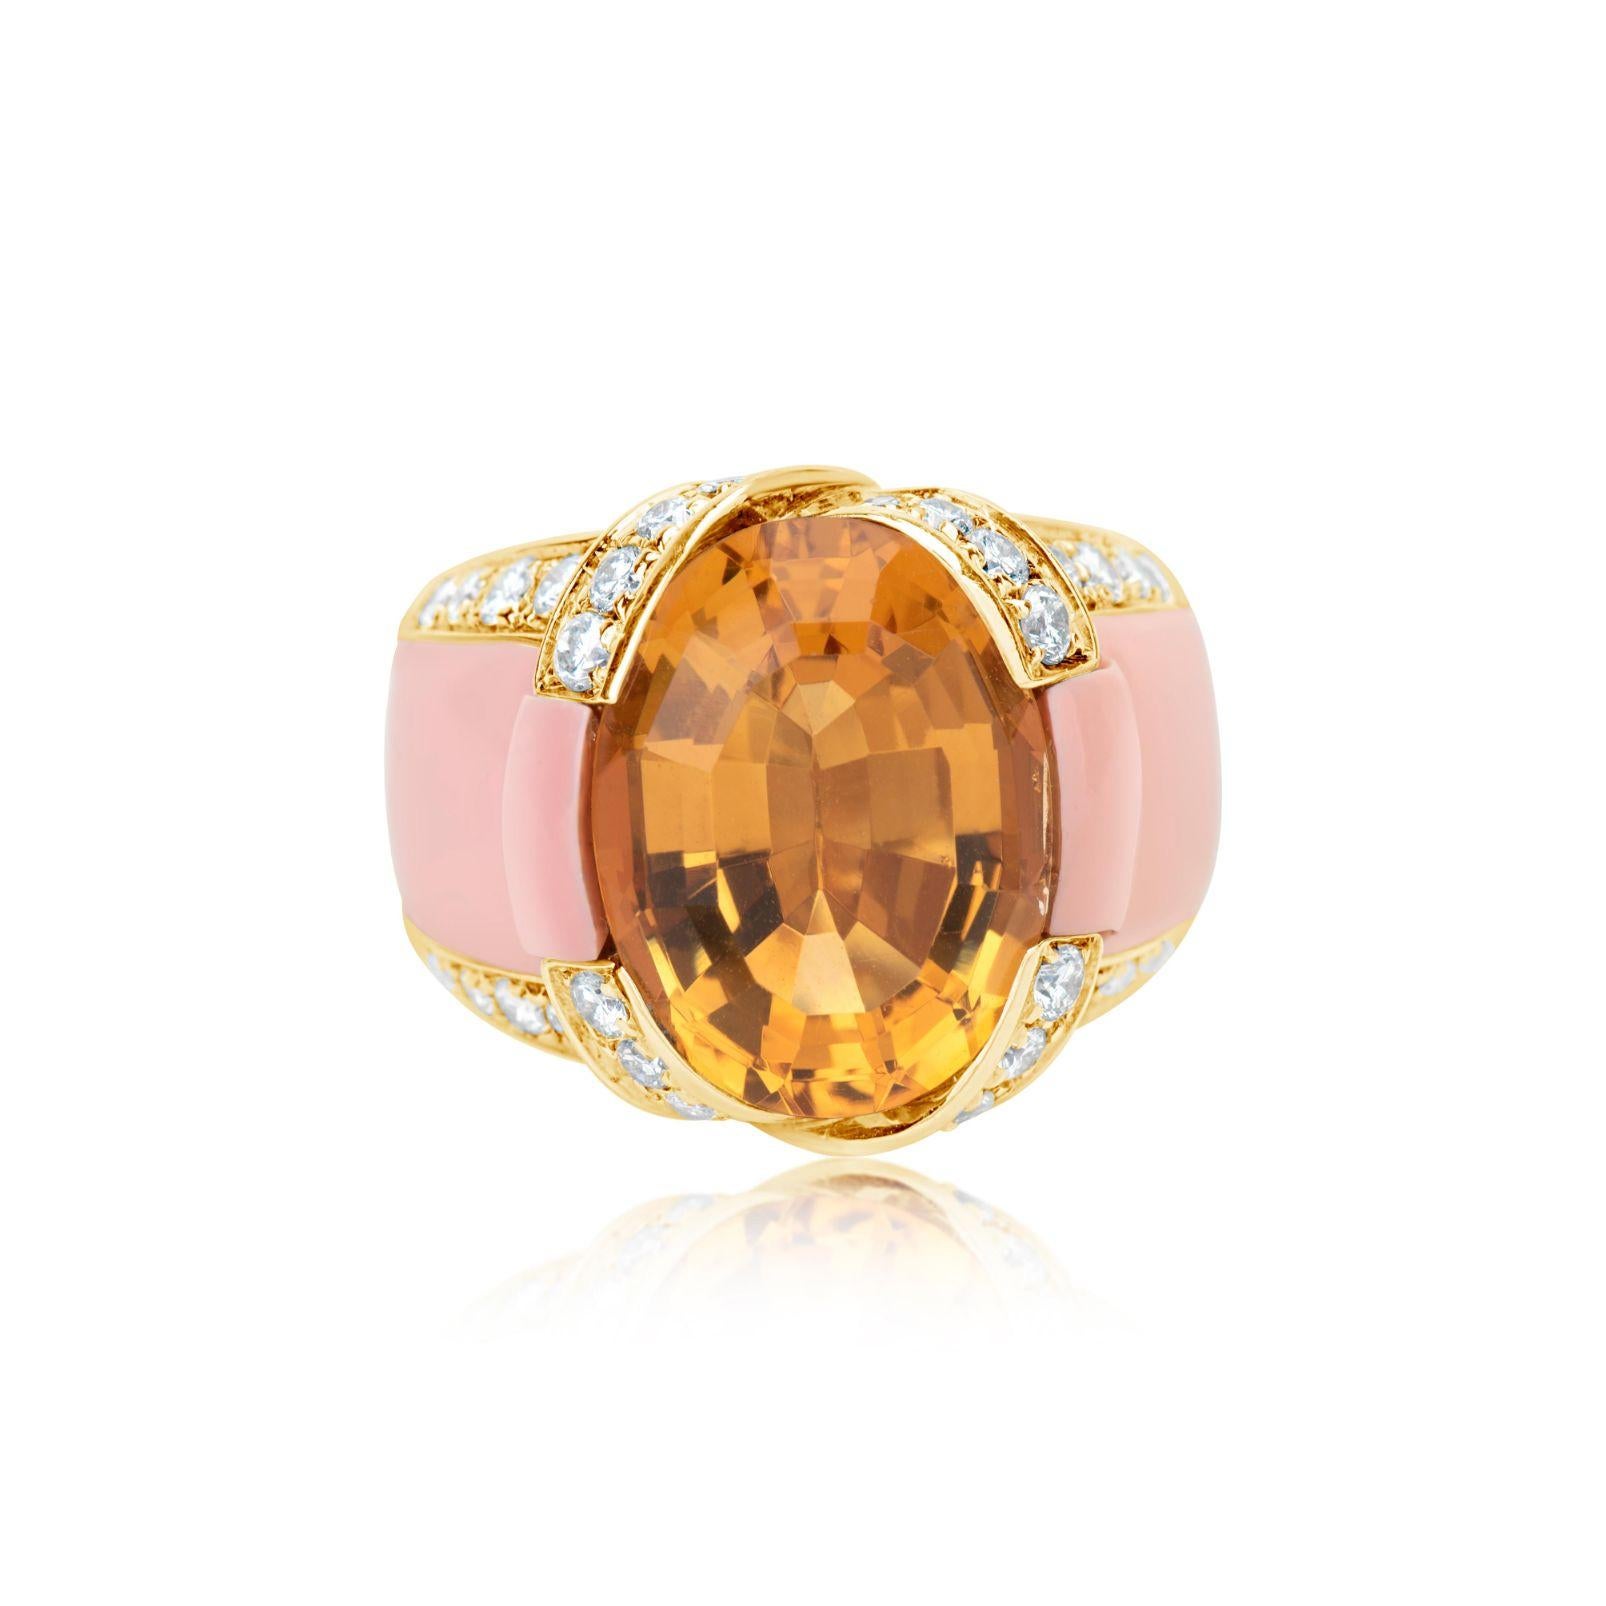 Andreoli Diamond Citrine Coral 18 Karat Yellow Gold Ring

This ring features:
- 1.01 Carat Diamond
- Citrine
- Angelskin Coral
- 13.50 Gram 18K Yellow Gold
- Made In Italy